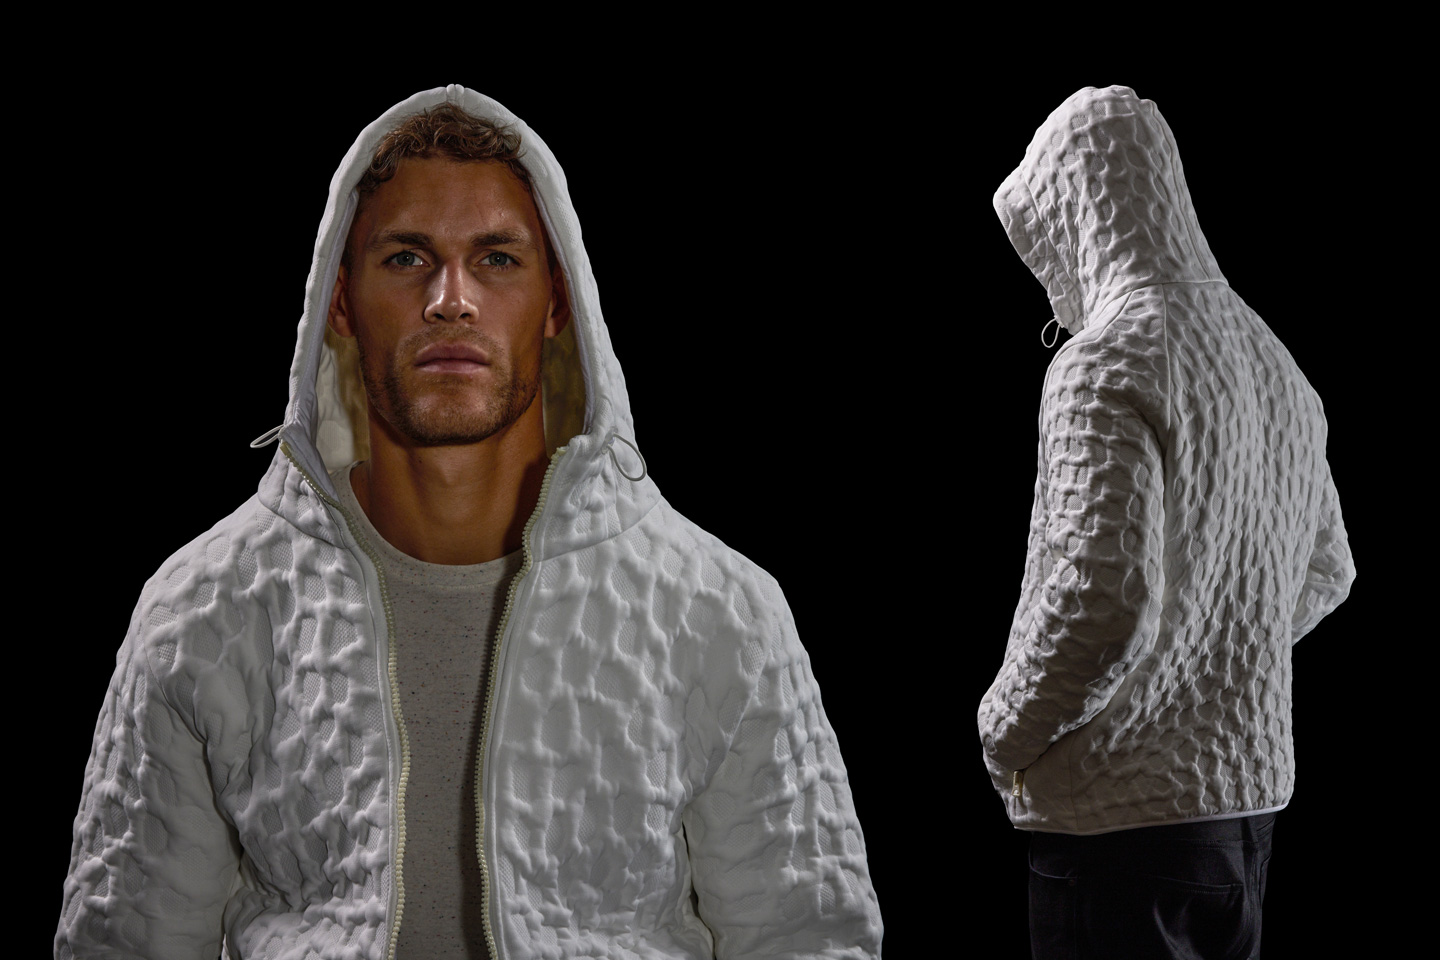 #Vollebak’s Mars Hoodie was inspired by a mattress, so you can feel comfortable even on the red planet